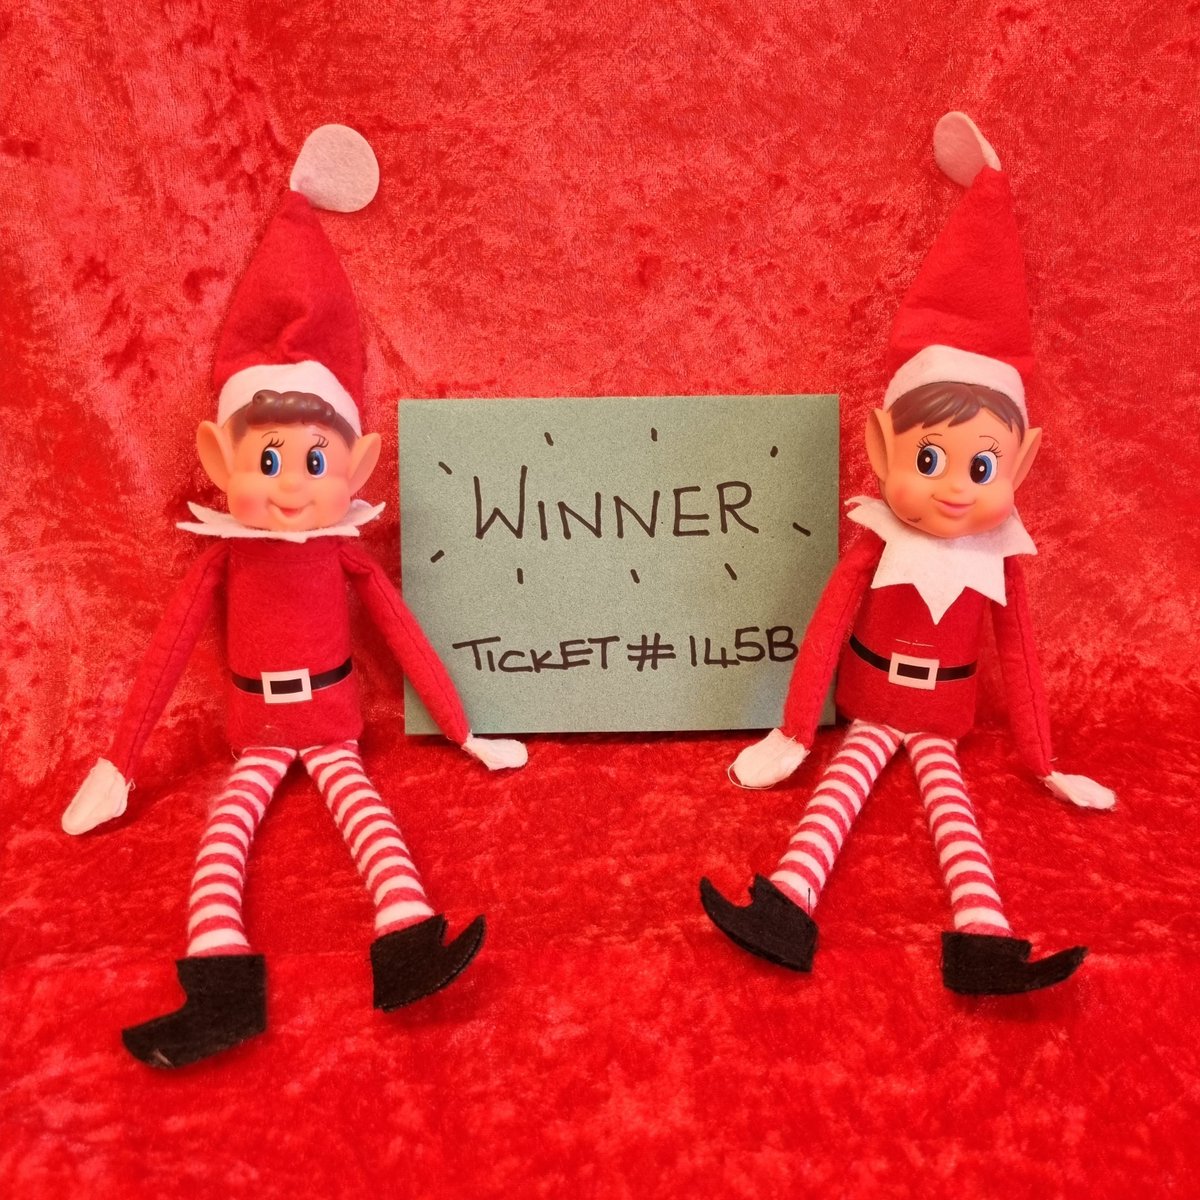 🎉 Congratulations to Ticket #145B for winning our Mental Elf Prize Draw! 🎉 We'll be reaching out to the lead booker via email next week 💙 Thank you to everyone who participated! Stay tuned for more exciting prize draws 🎁